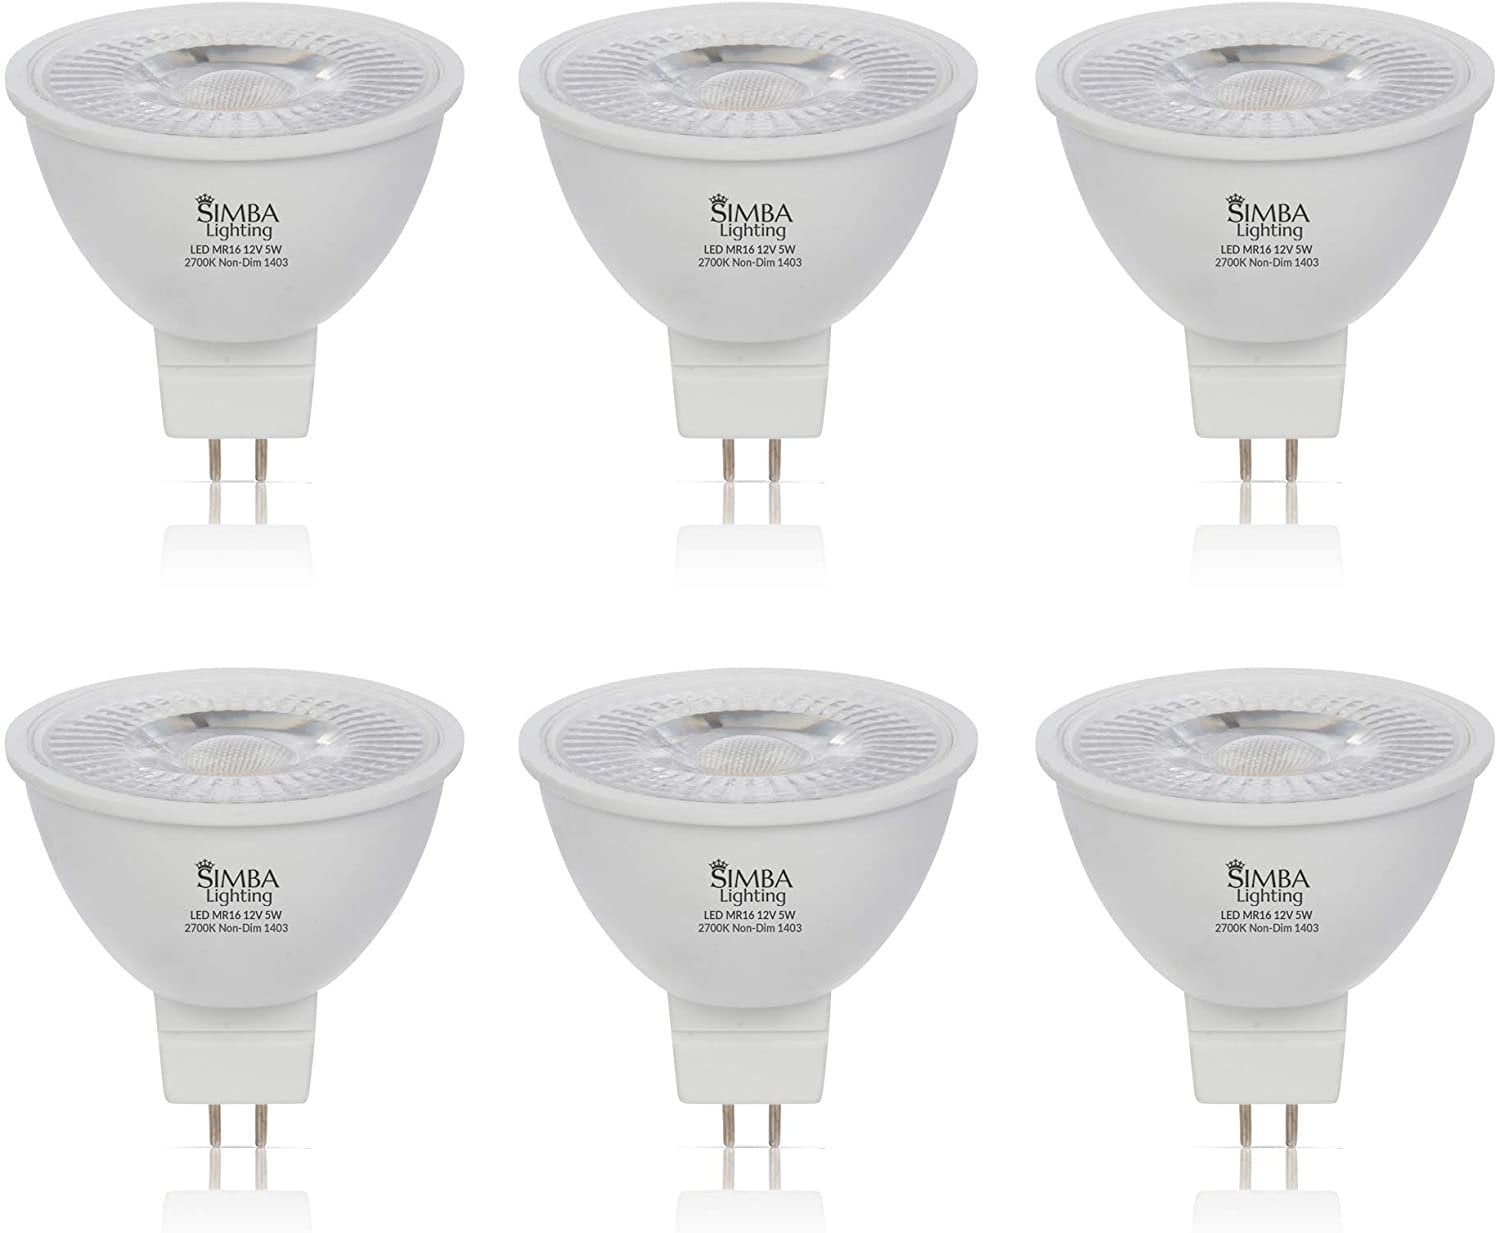 50W Equivalent Aluminum 12V AC/DC 5W 5-Pack HERO-LED MR16-U6S-WW Dimmable MR16 GU5.3 Low Voltage LED Halogen Replacement Bulb UL Approved Warm White 3000K 